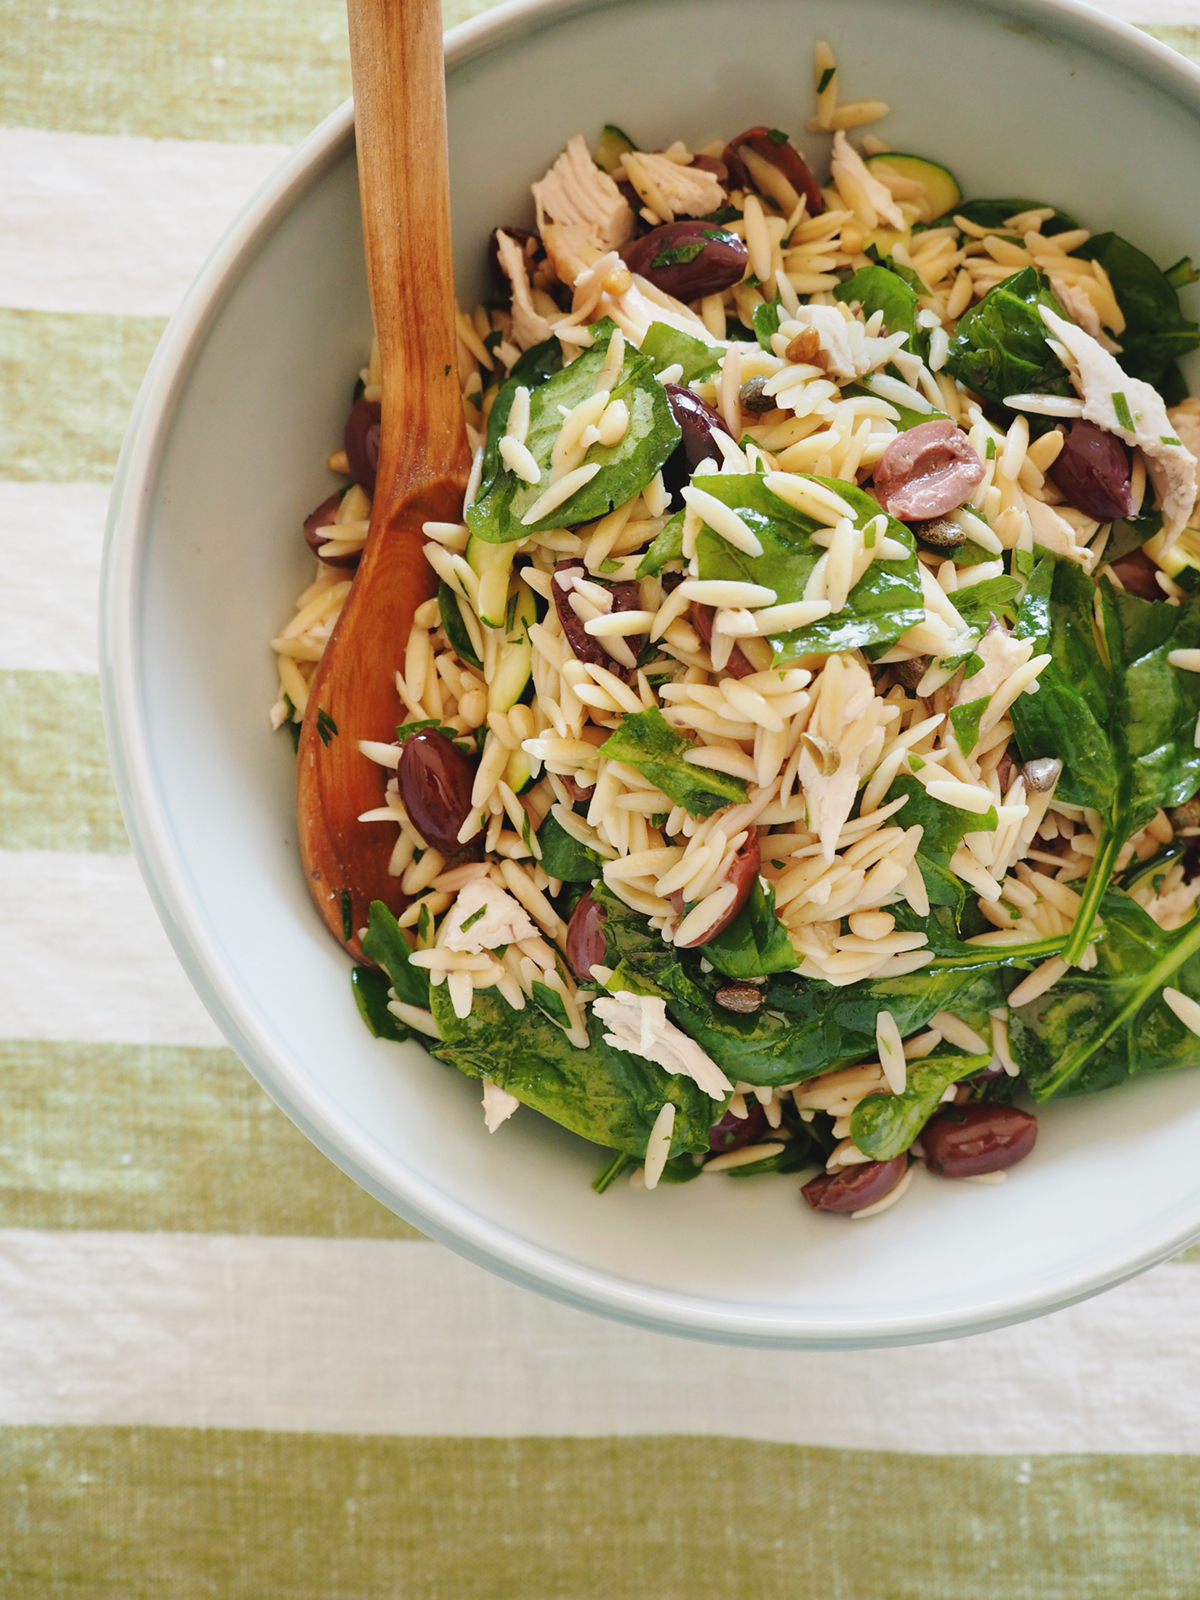 grilled chicken and orzo pasta salad recipe with spinach olives and pine nuts